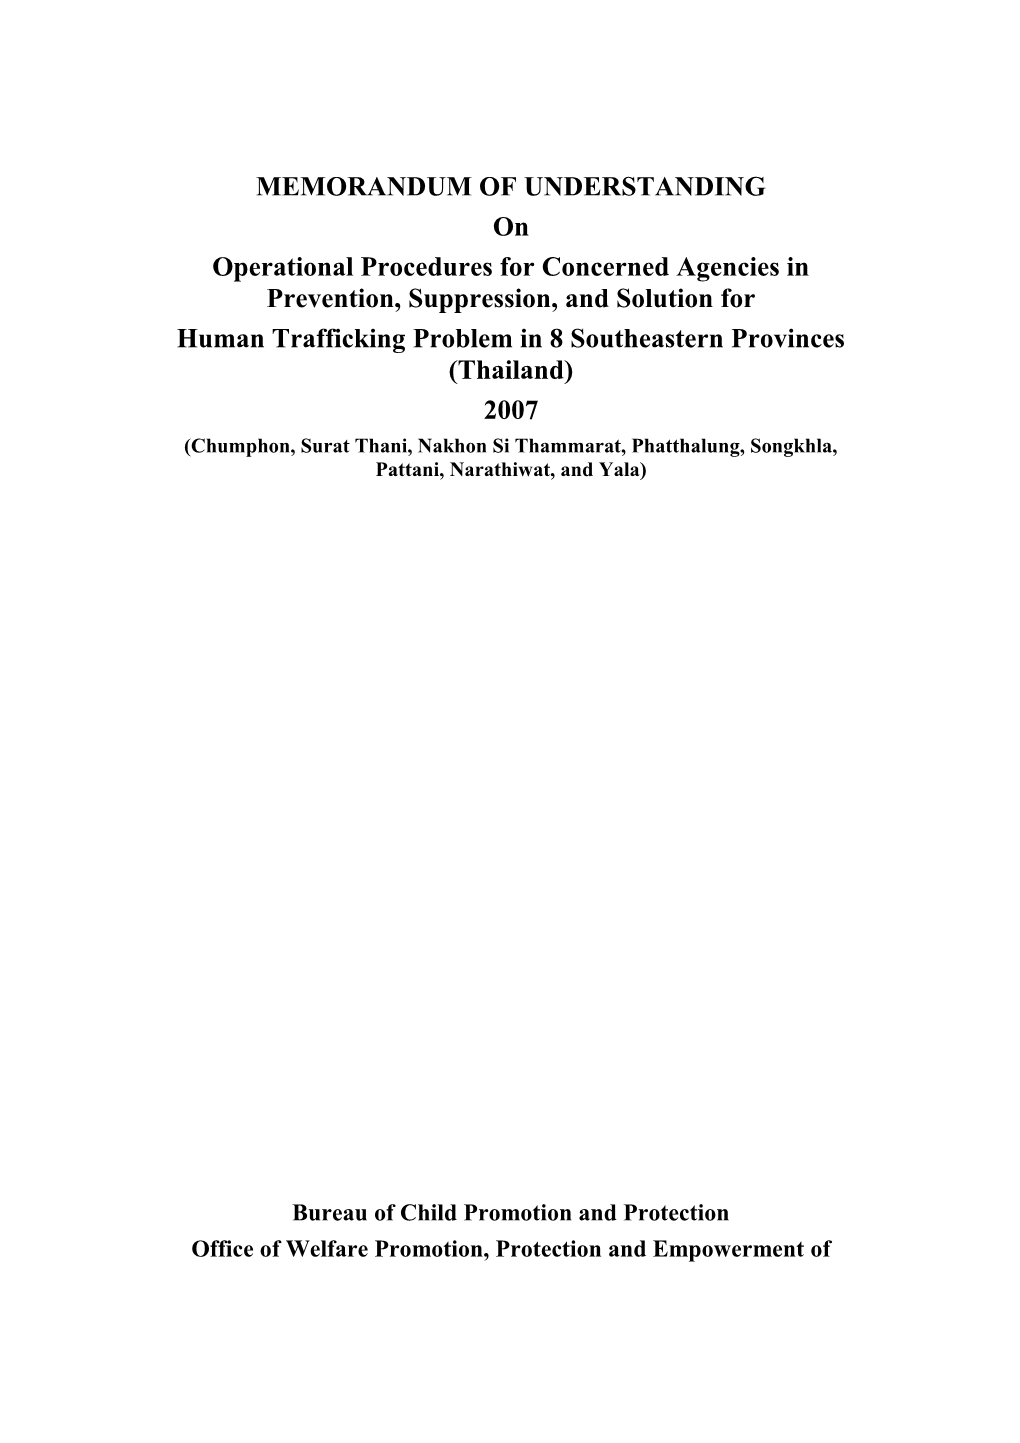 Operational Procedures for Concerned Agencies in Prevention, Suppression, and Solution For